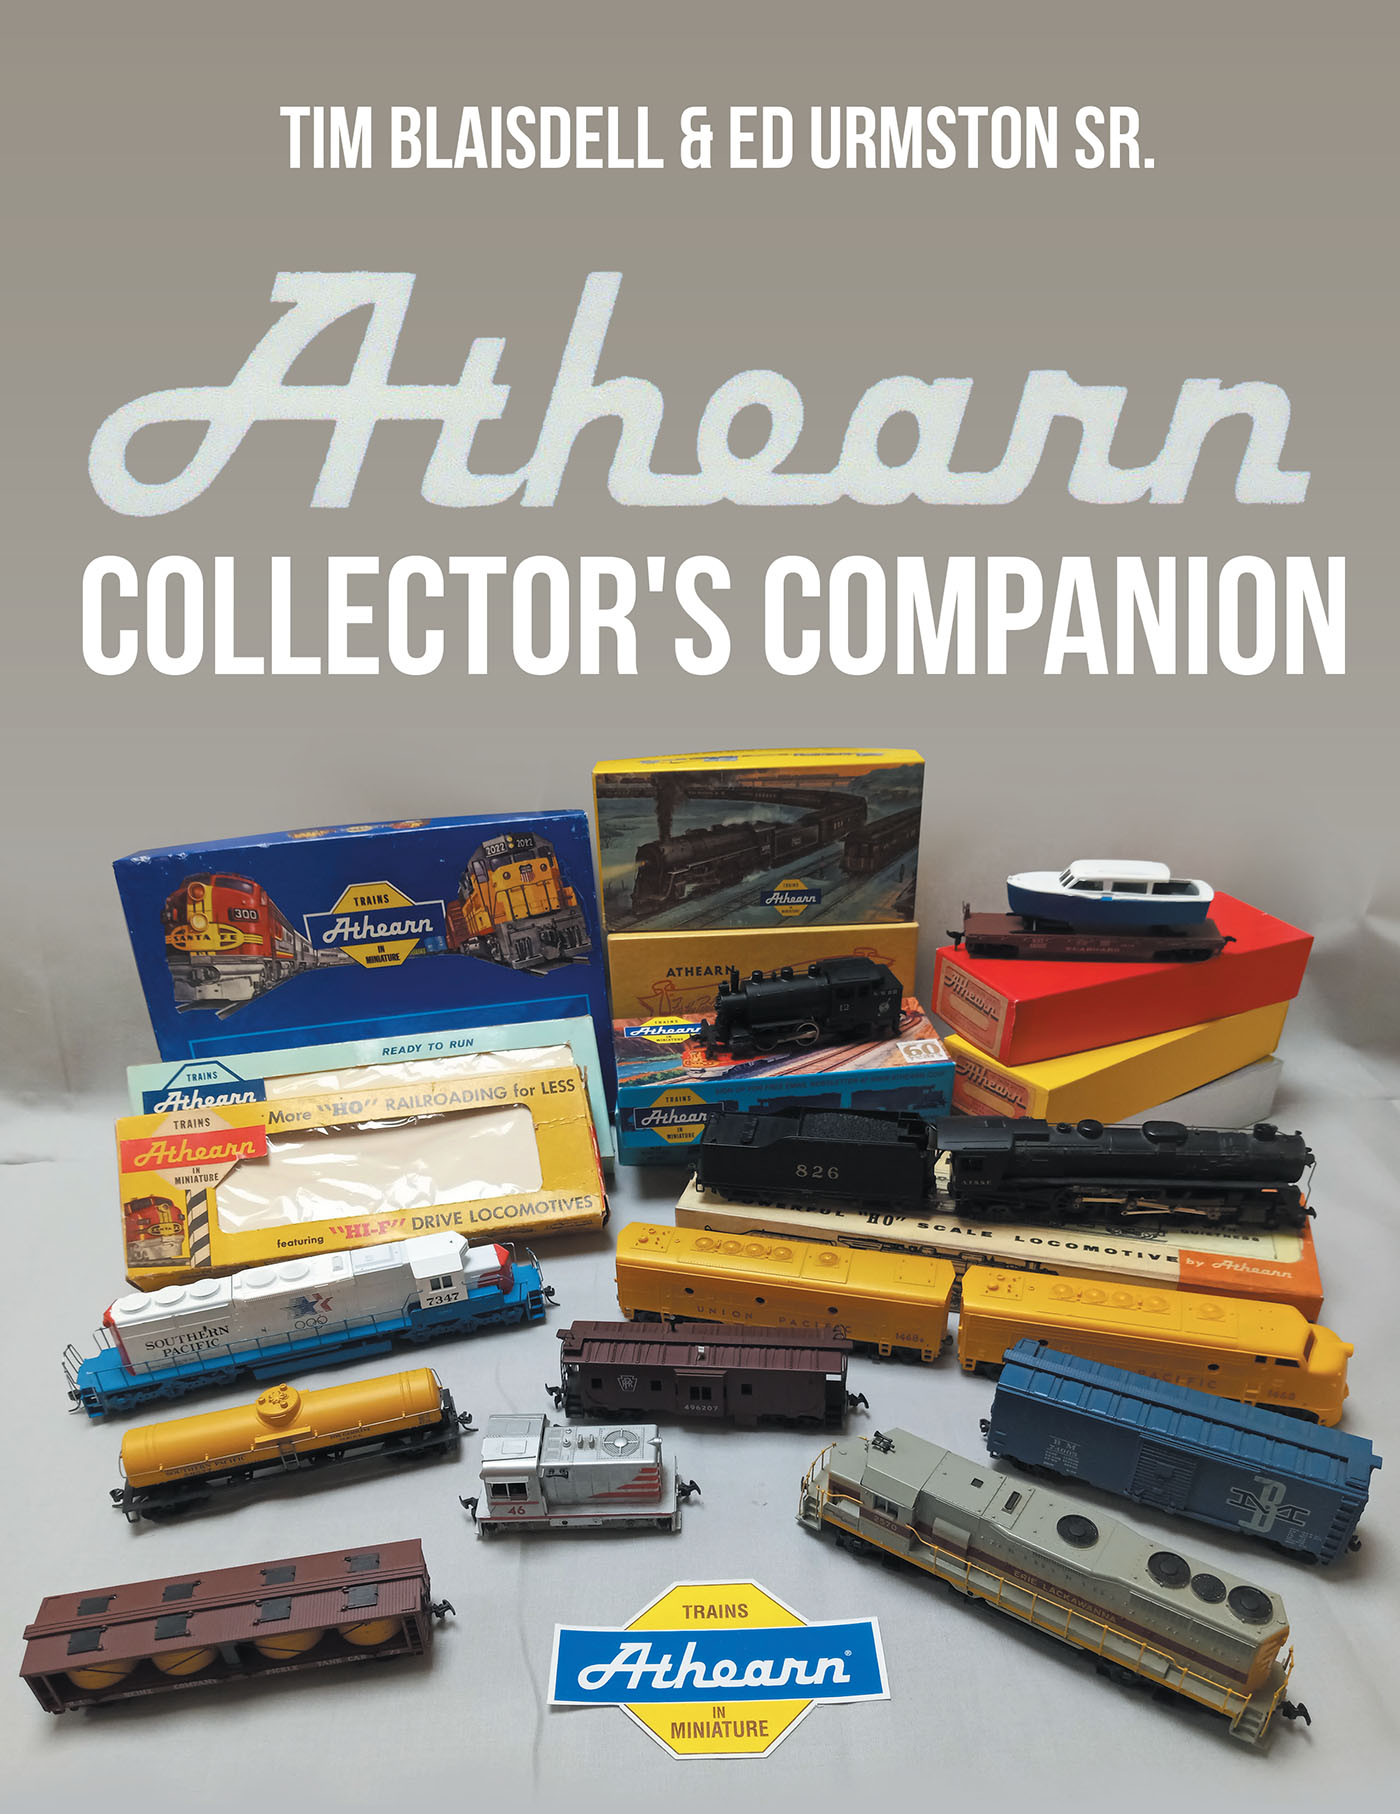 Authors Tim Blaisdell and Ed Urmston Sr.’s New Book, “The Athearn Collector’s Companion: Yellow and Blue Box Kits and Early 'RTR' Models through 2009,” is Released